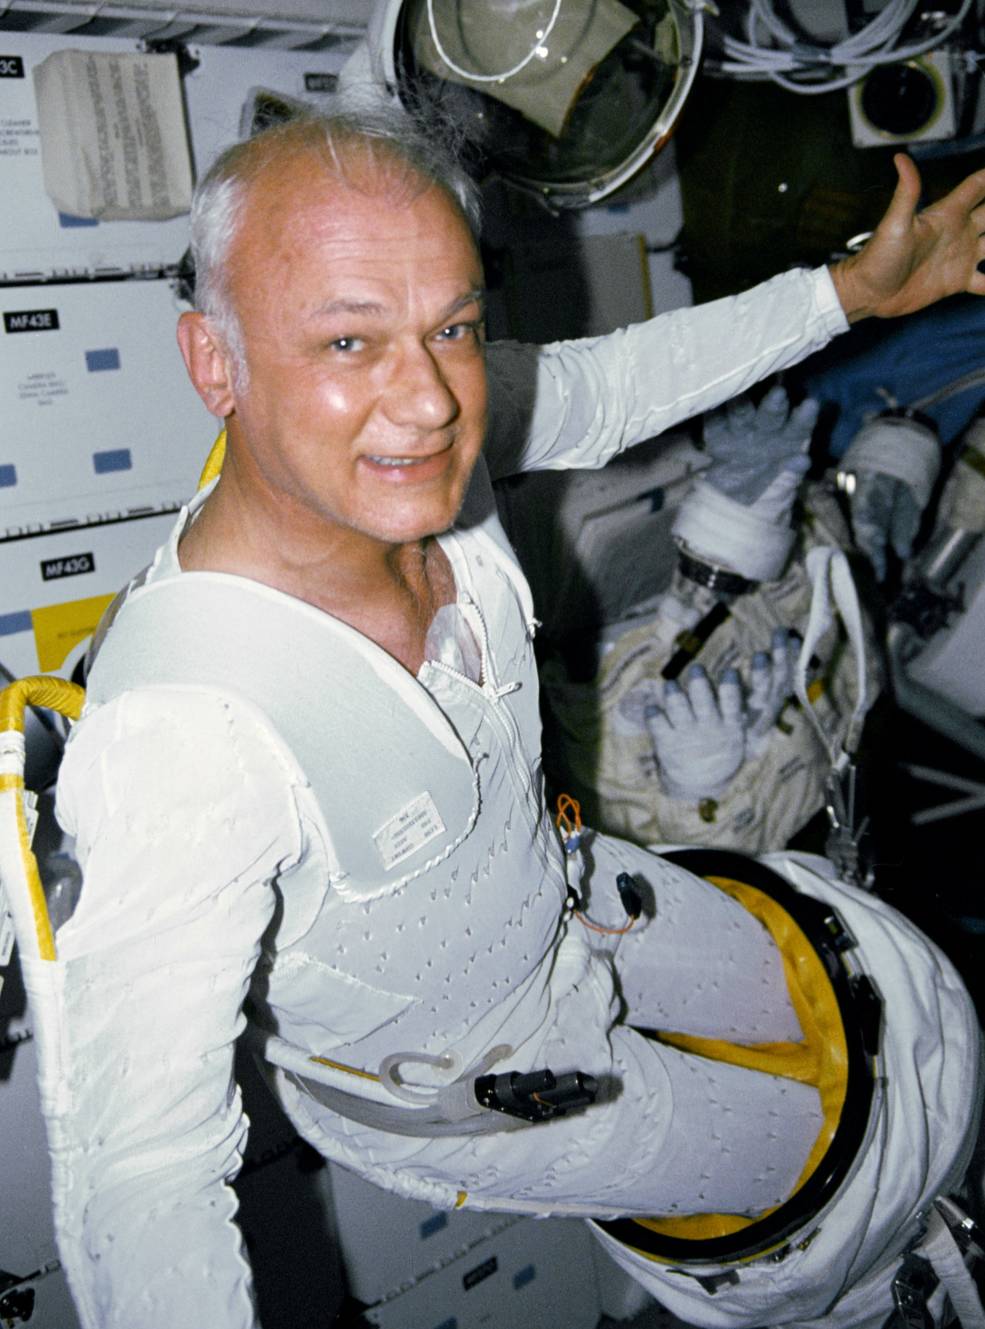 hubble_sts_31_mccandless_suiting_up